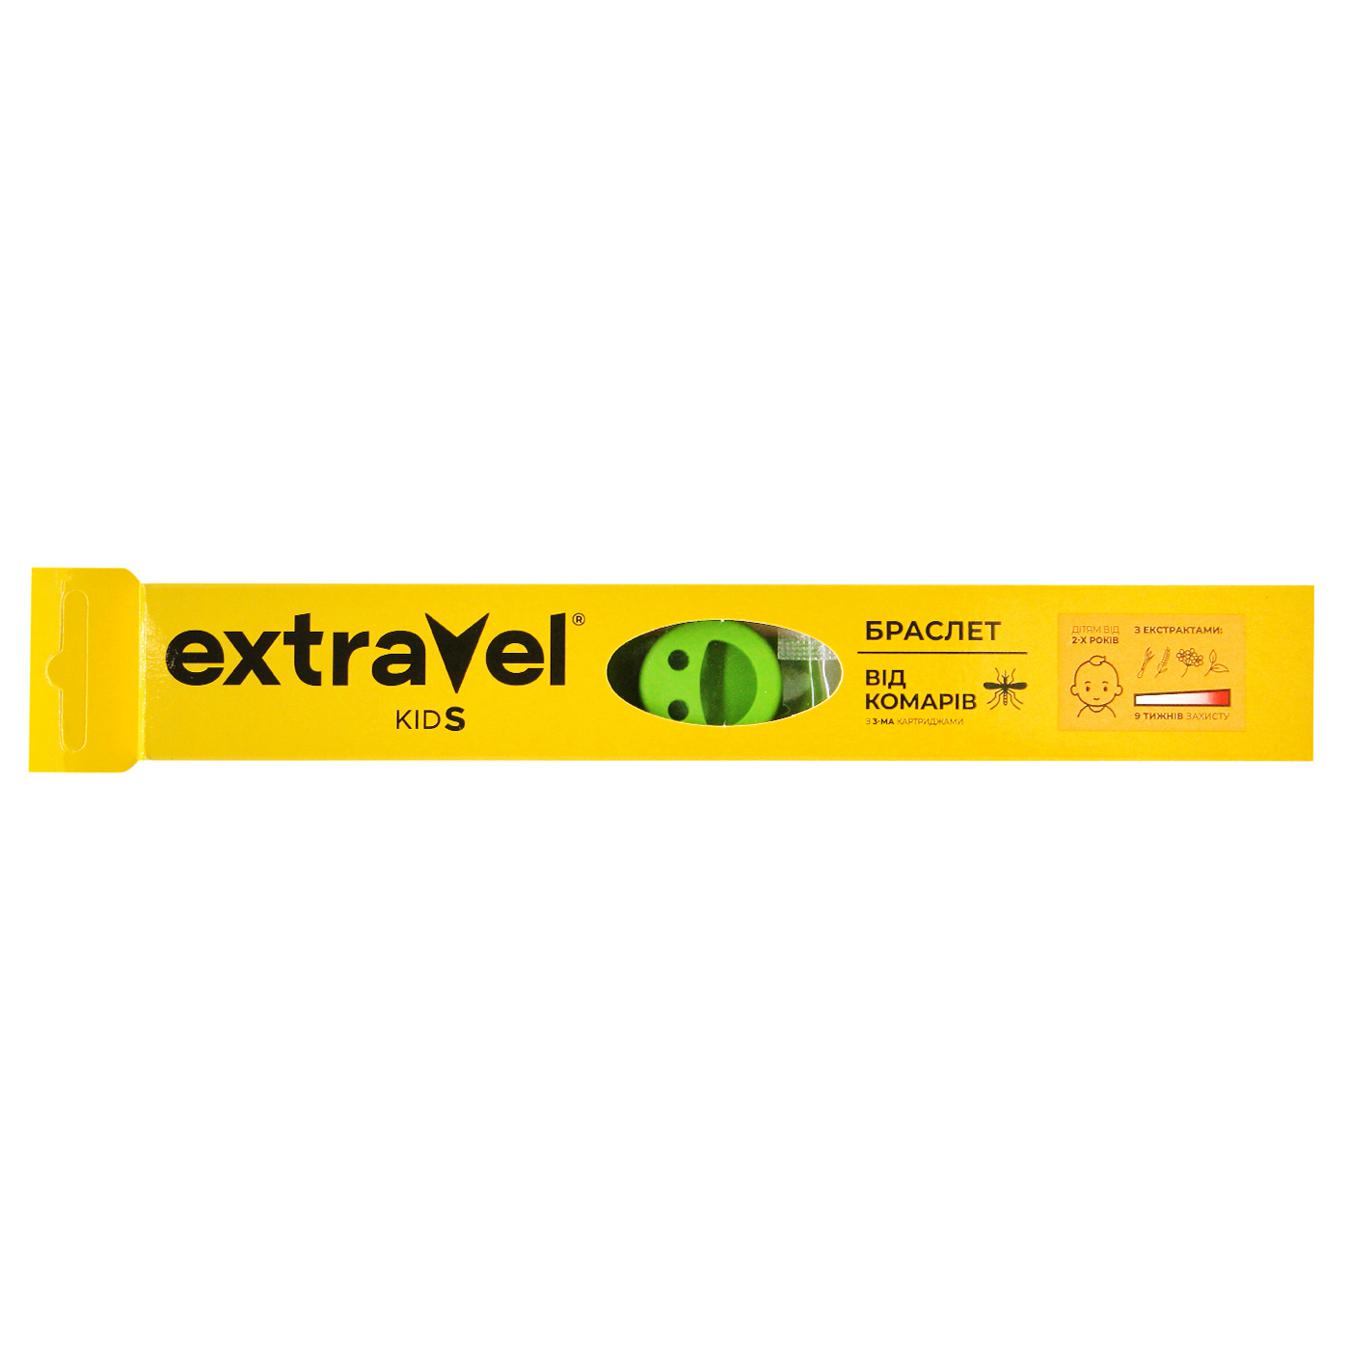 Anti-mosquito bracelet Extravel Kids with replaceable children's cartridge 1.8g